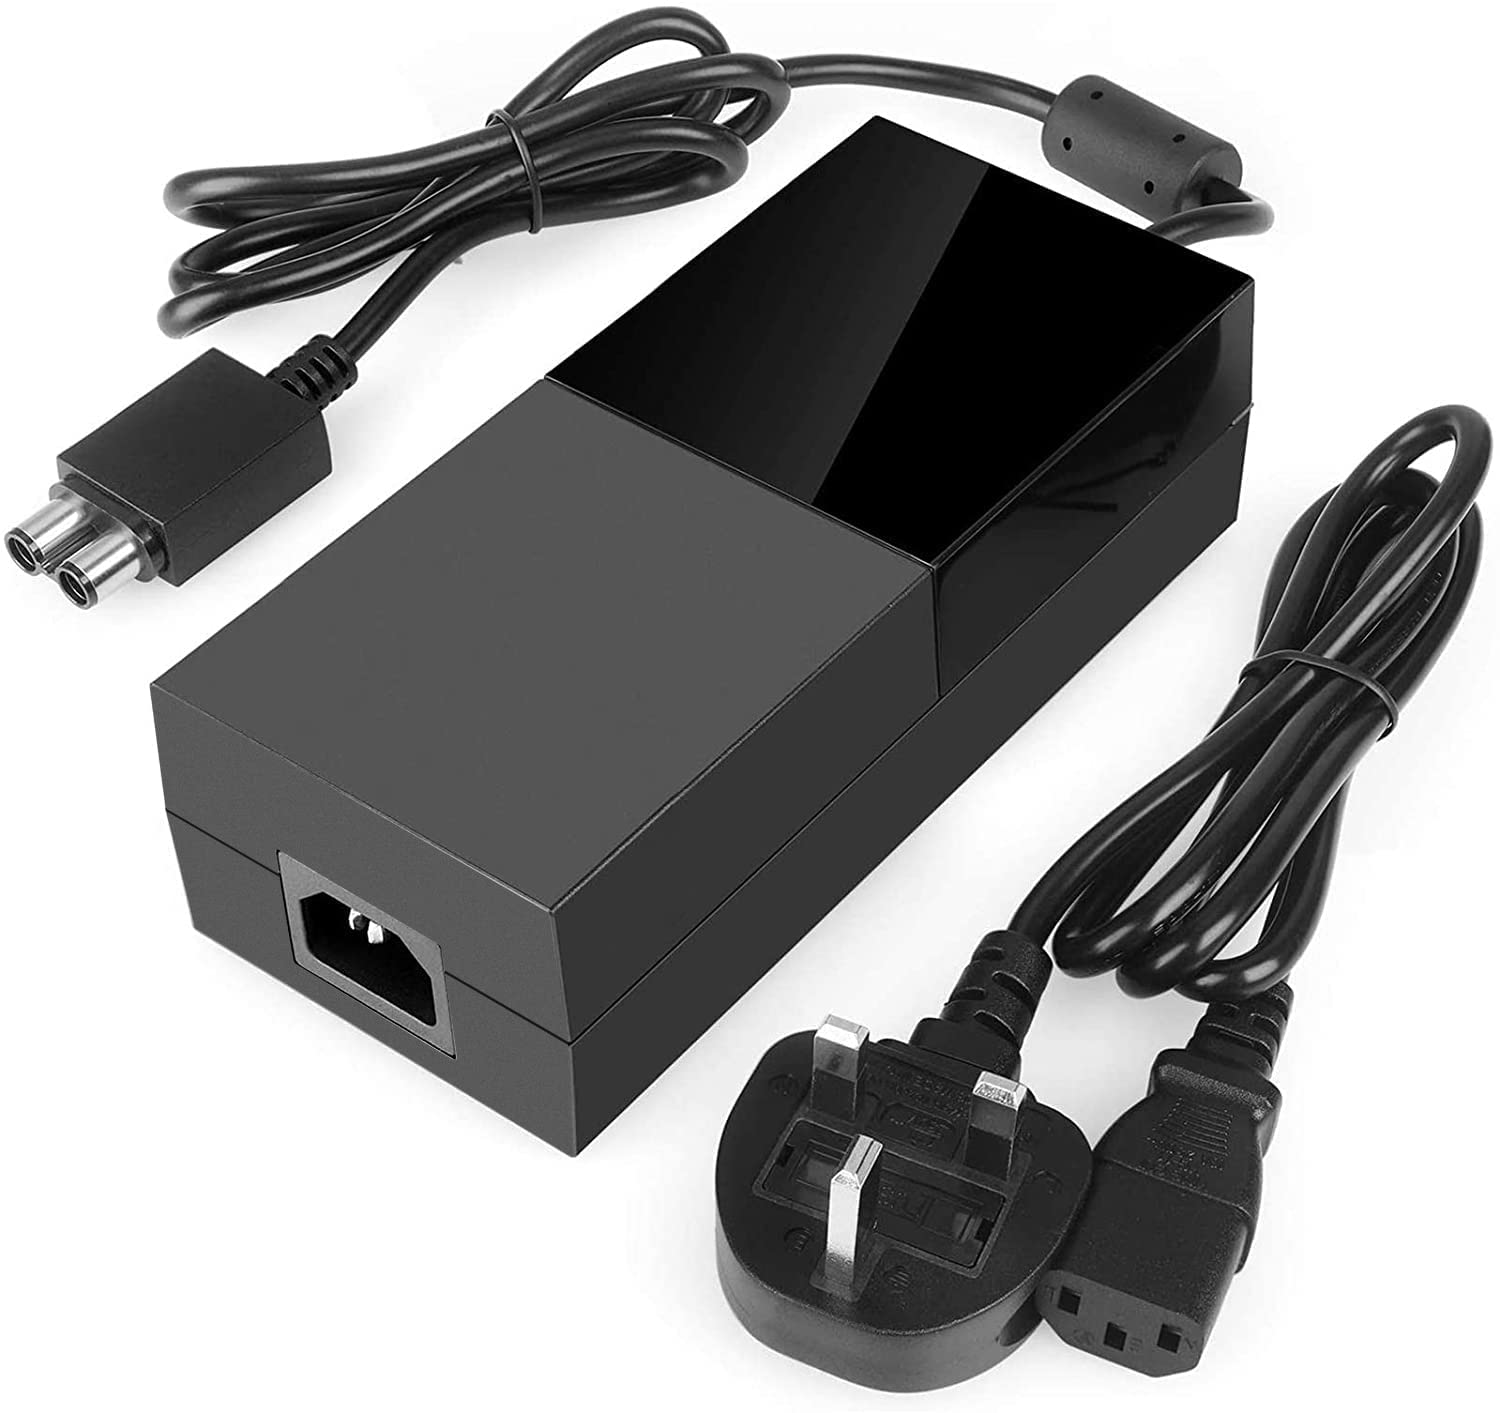 Xbox One Power Supply Brick, AC Adapter Replacement for Xbox One Console,100-240V Worldwide Use